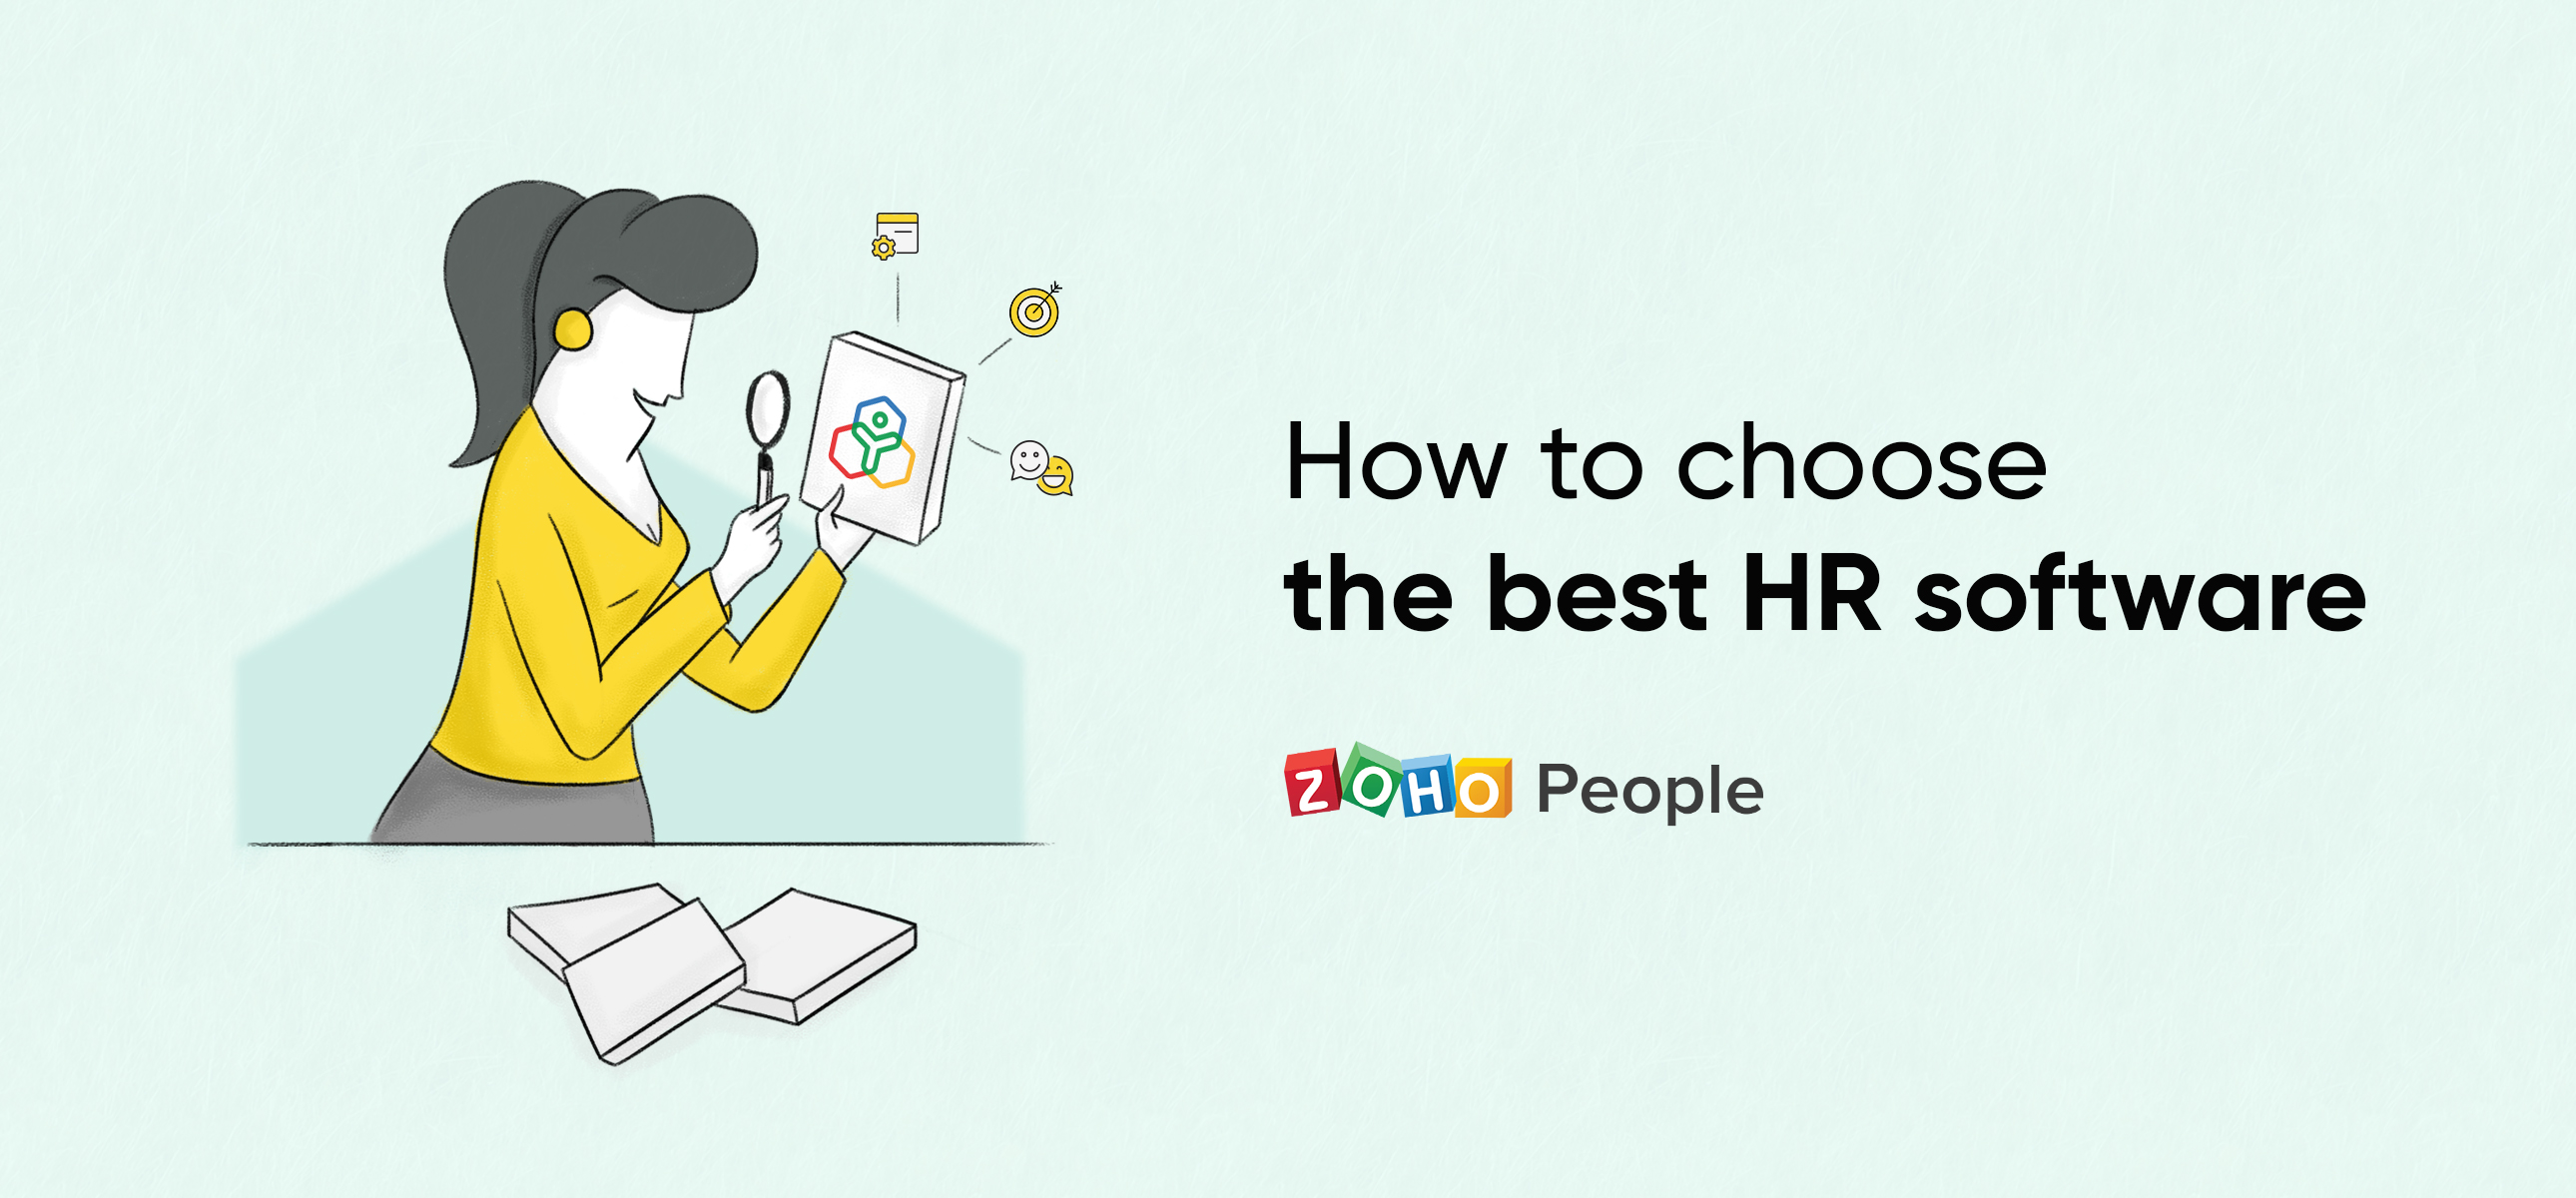 Selecting the best HR software for your organization